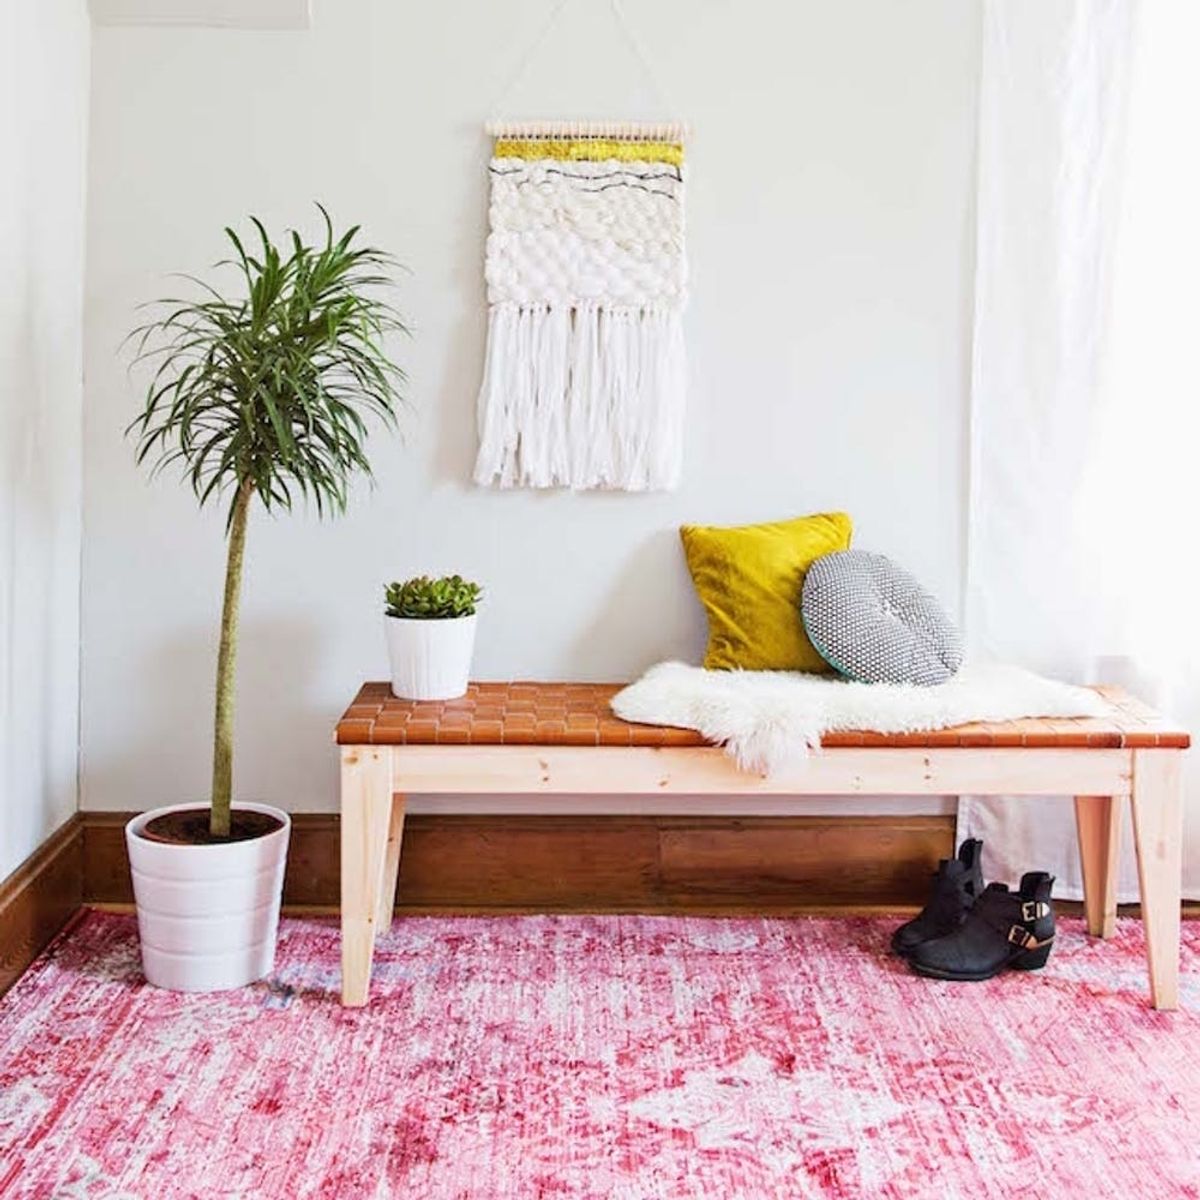 17 DIY Decor Projects That’ll Ensure You Get Your Rental Deposit Back